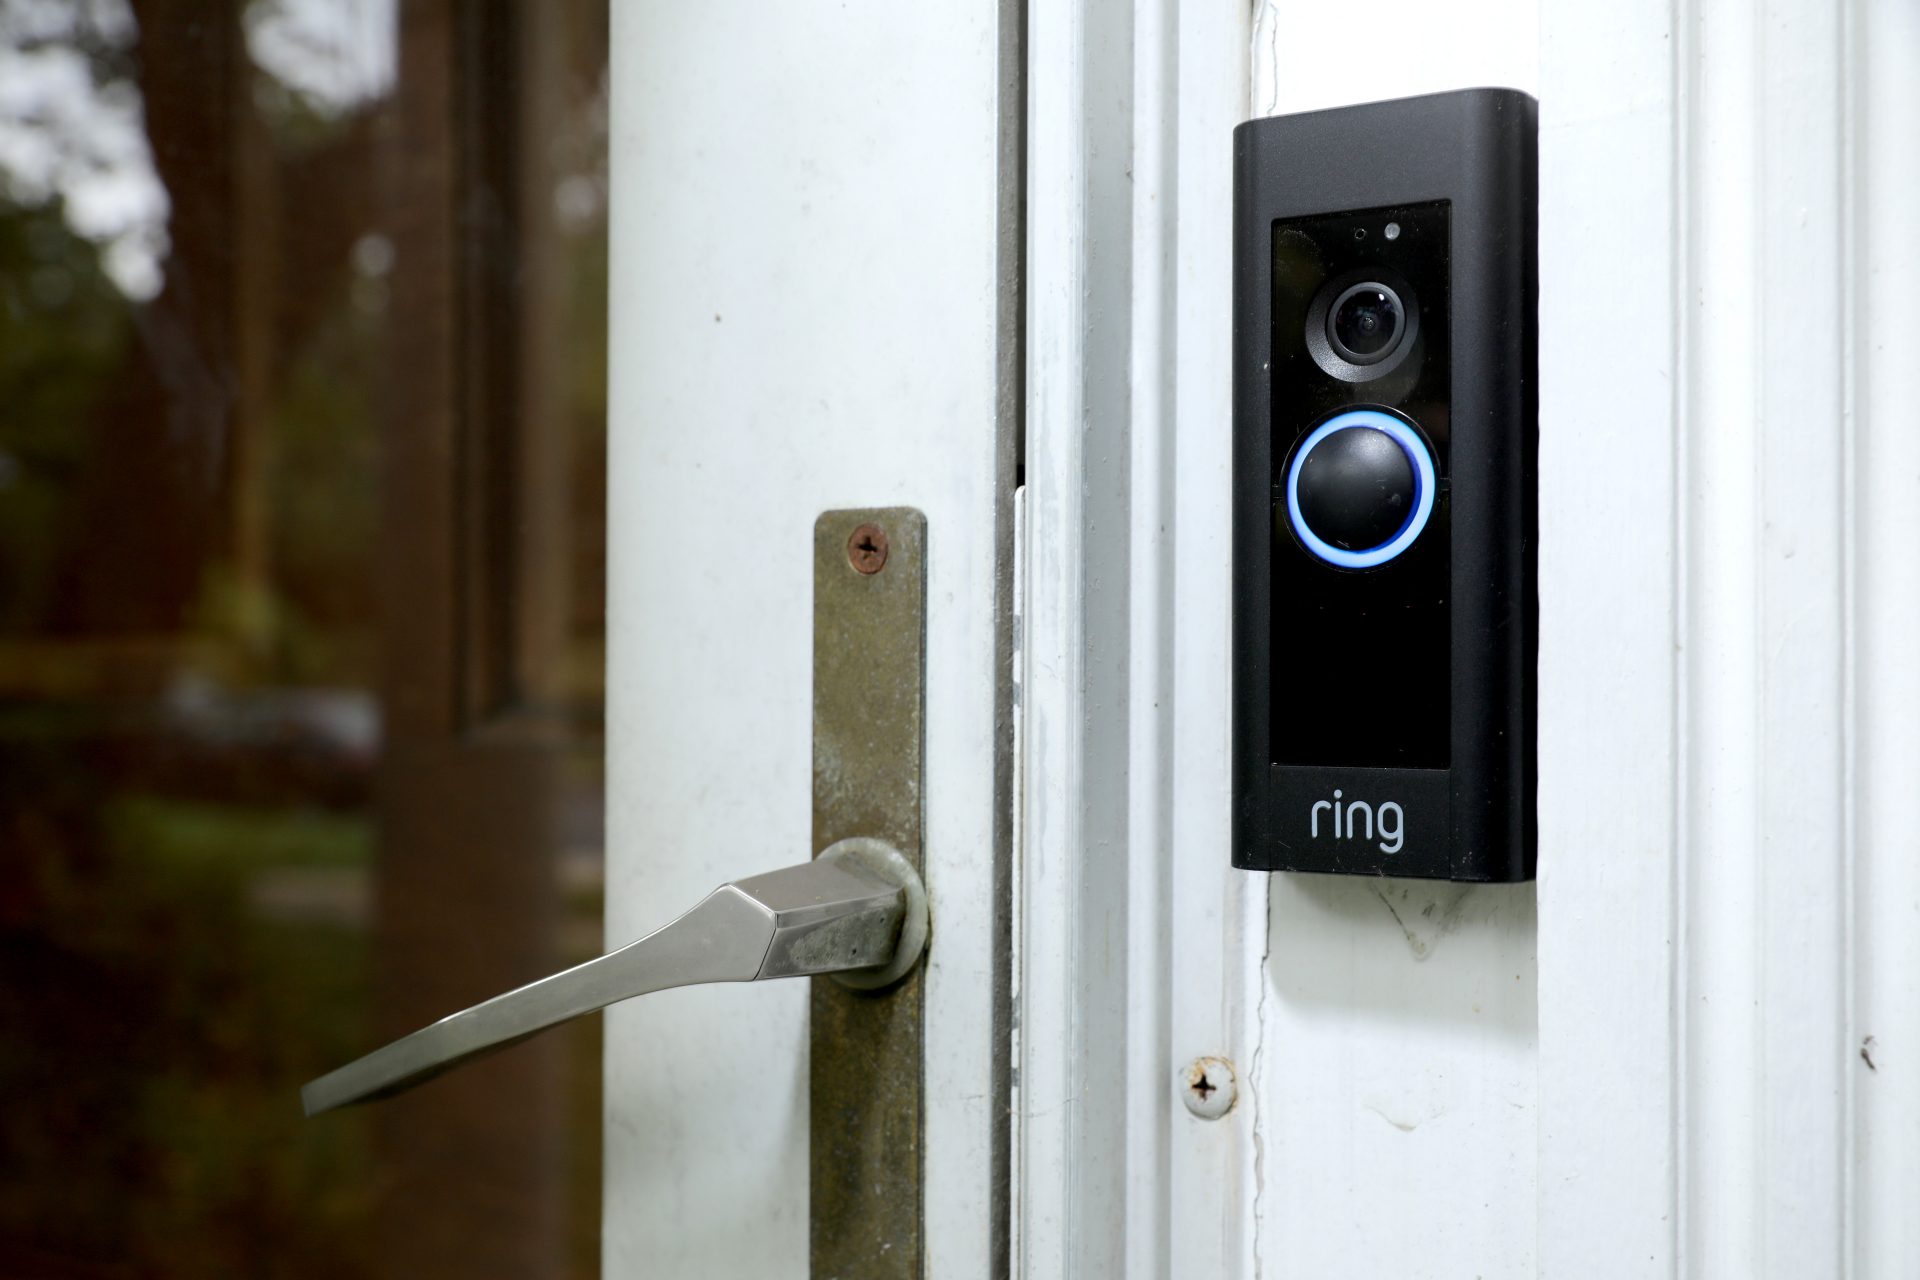 Amazon’s Ring has teamed up with over 2,000 police and fireplace departments